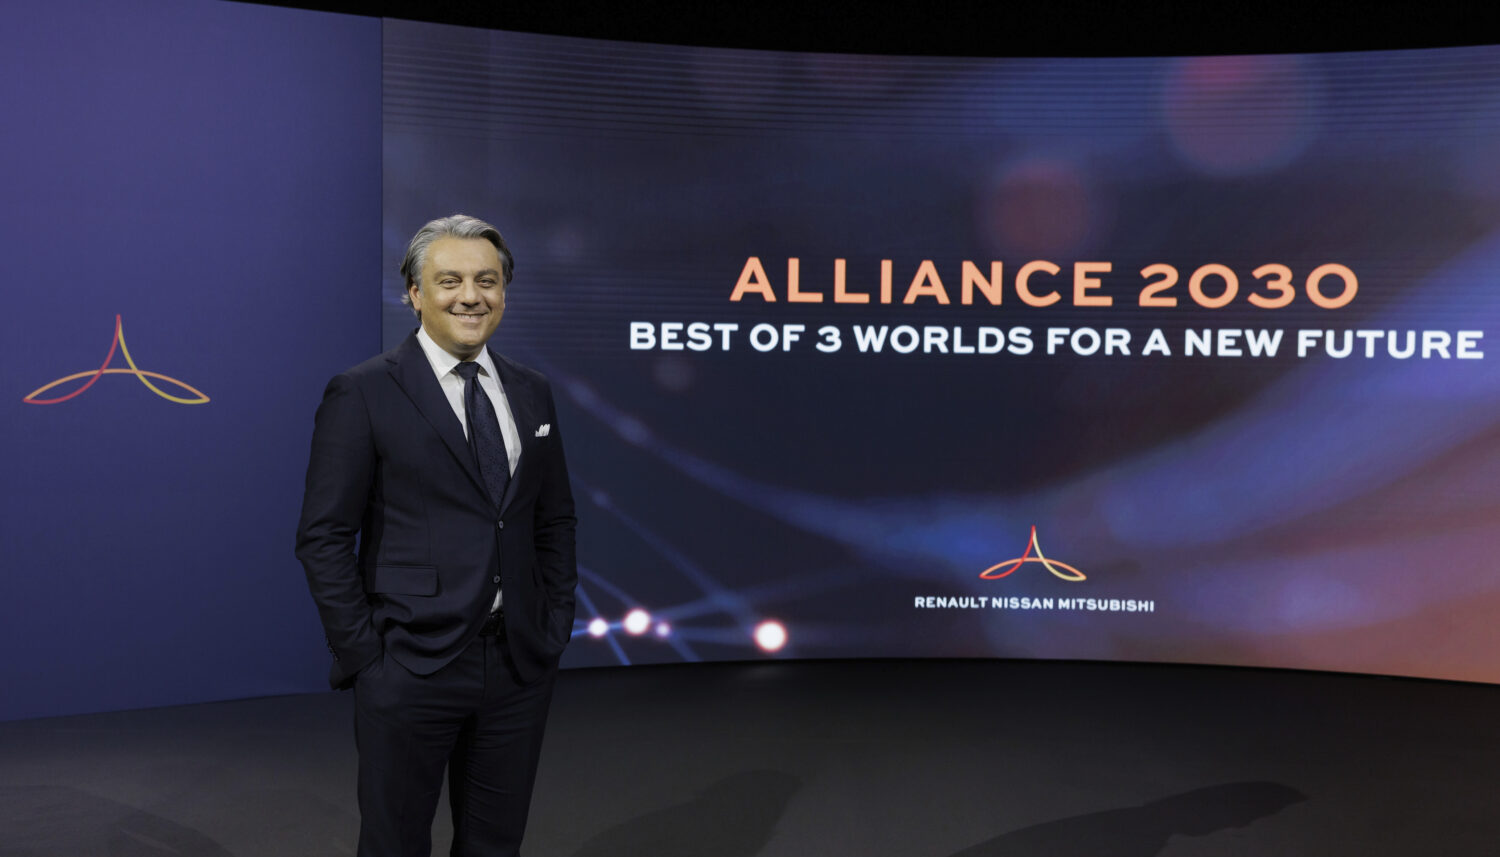 Alliance 2030 - Best of 3 Worlds for a new future